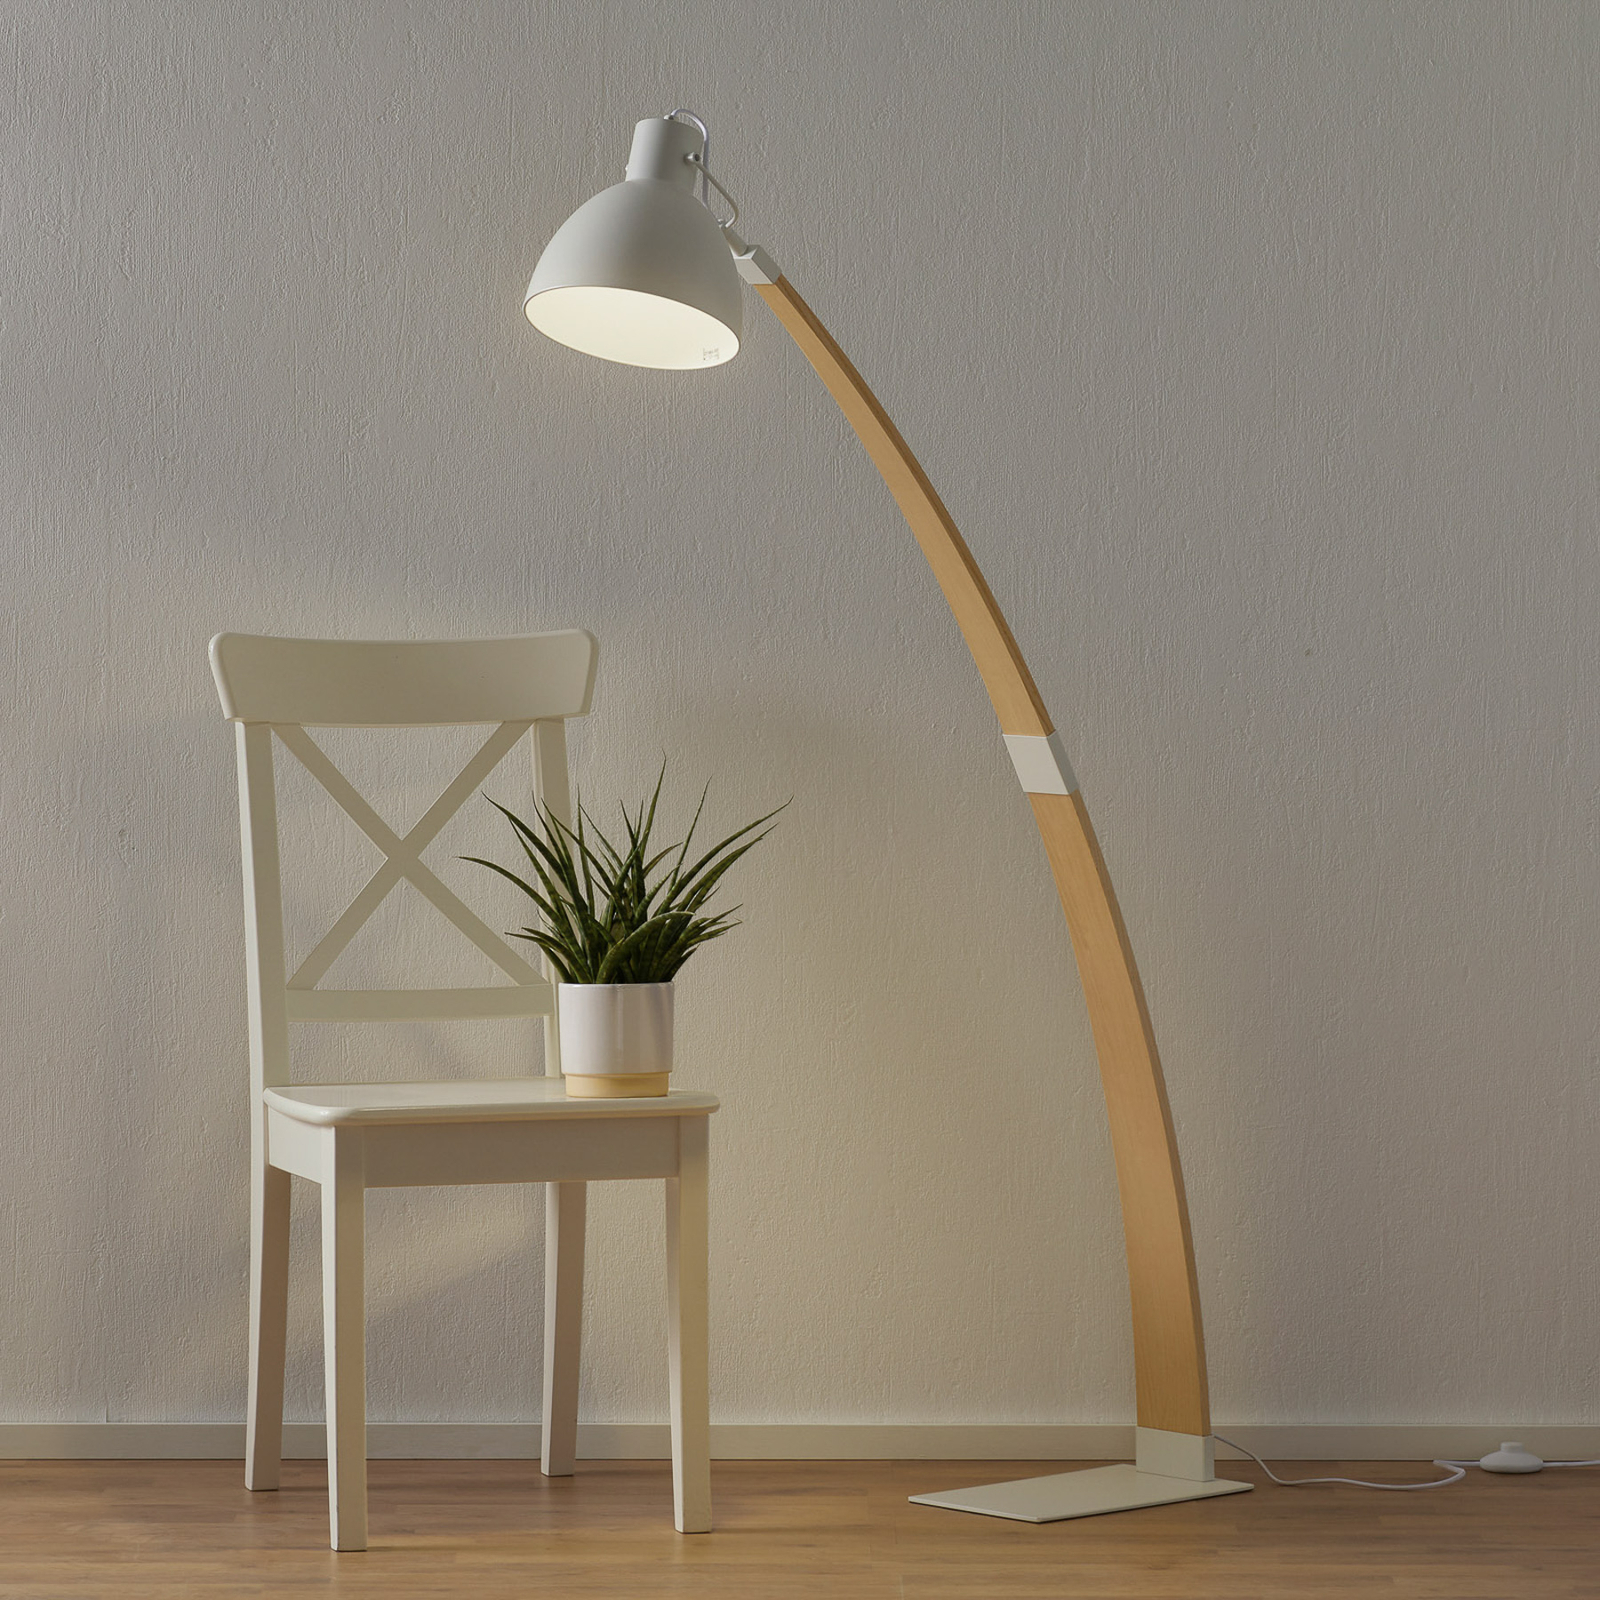 Curf floor lamp with white lampshade